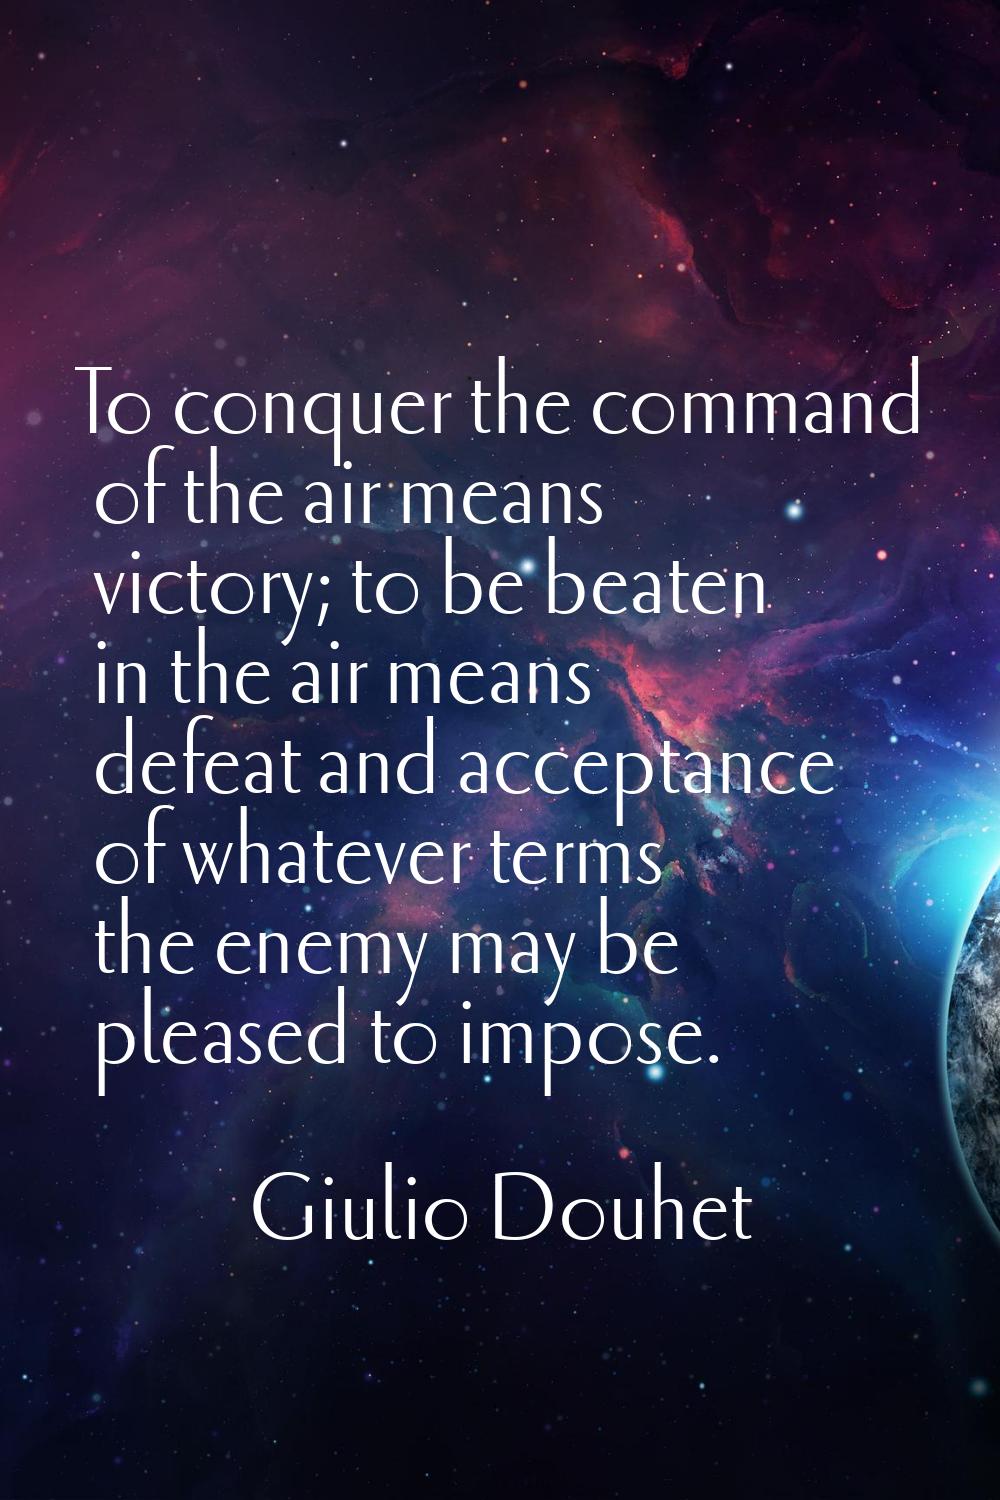 To conquer the command of the air means victory; to be beaten in the air means defeat and acceptanc